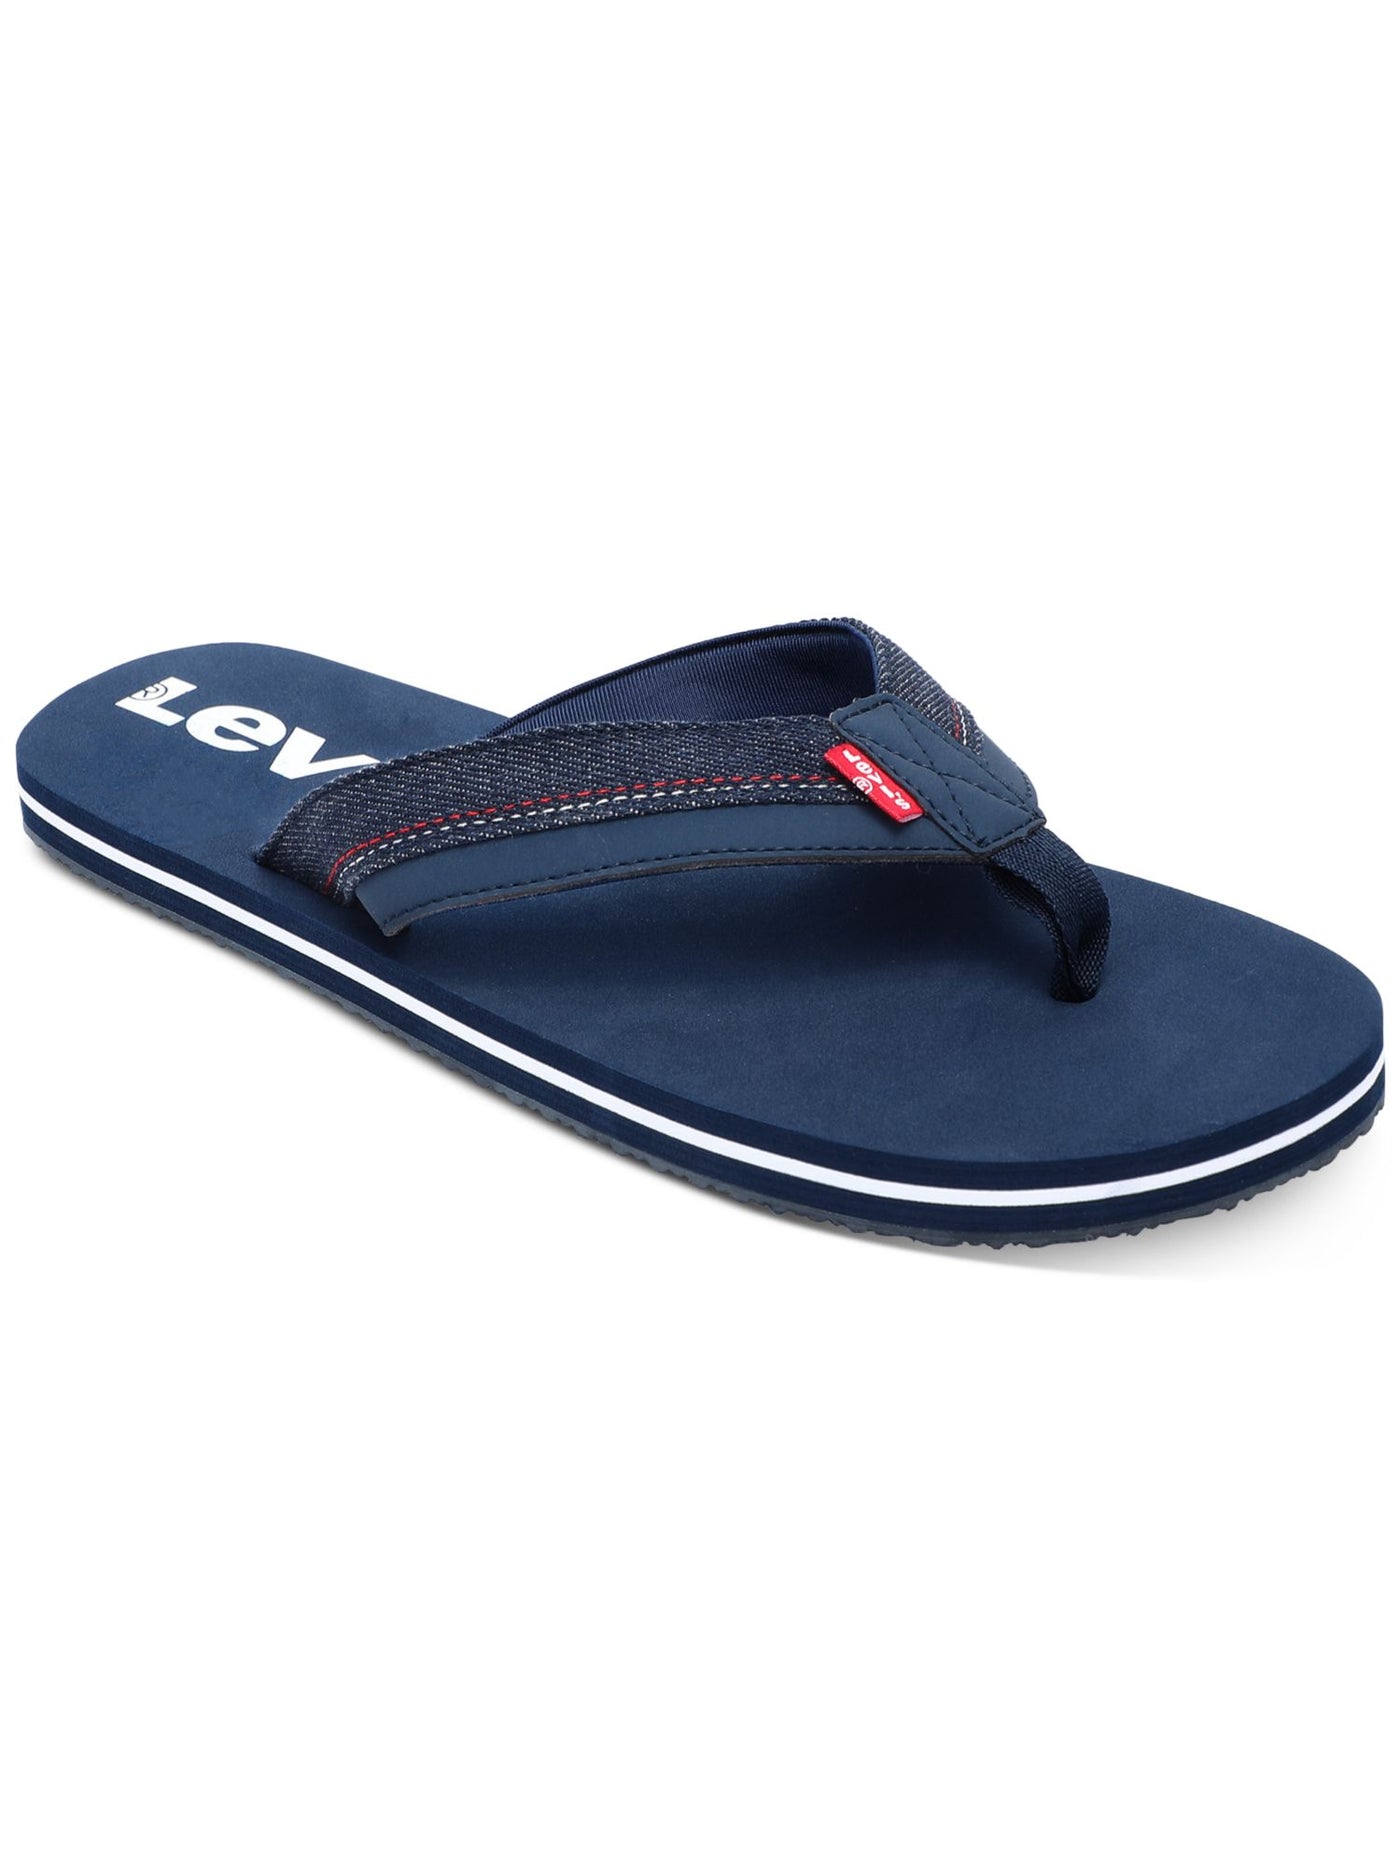 LEVI'S Mens Navy Mixed Media Padded Wordmark Strap Open Toe Slip On Thong Sandals Shoes 13